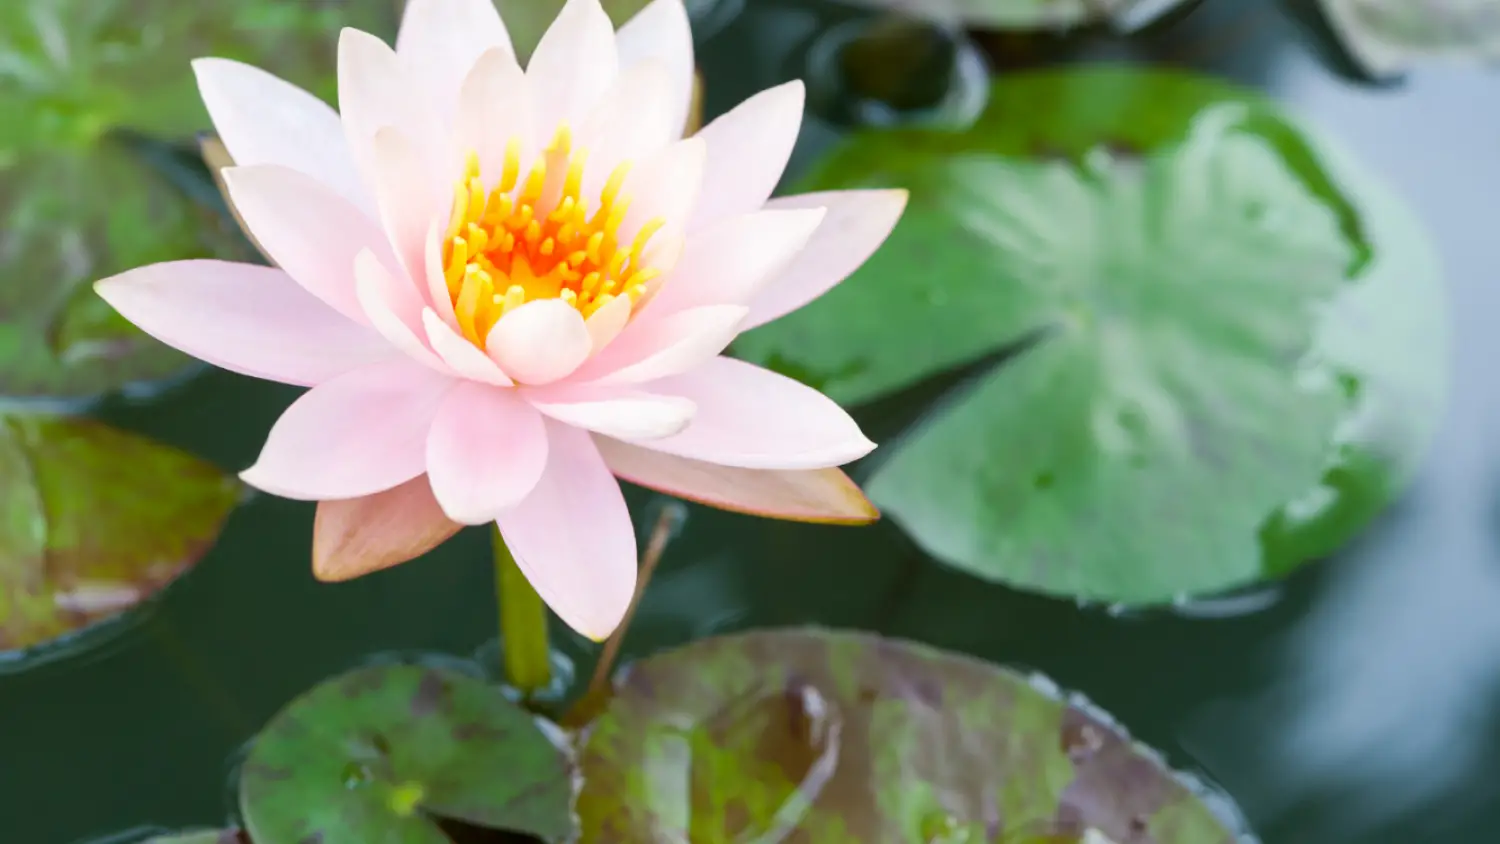 10 Best Pond Decorations For A Small Garden Pond